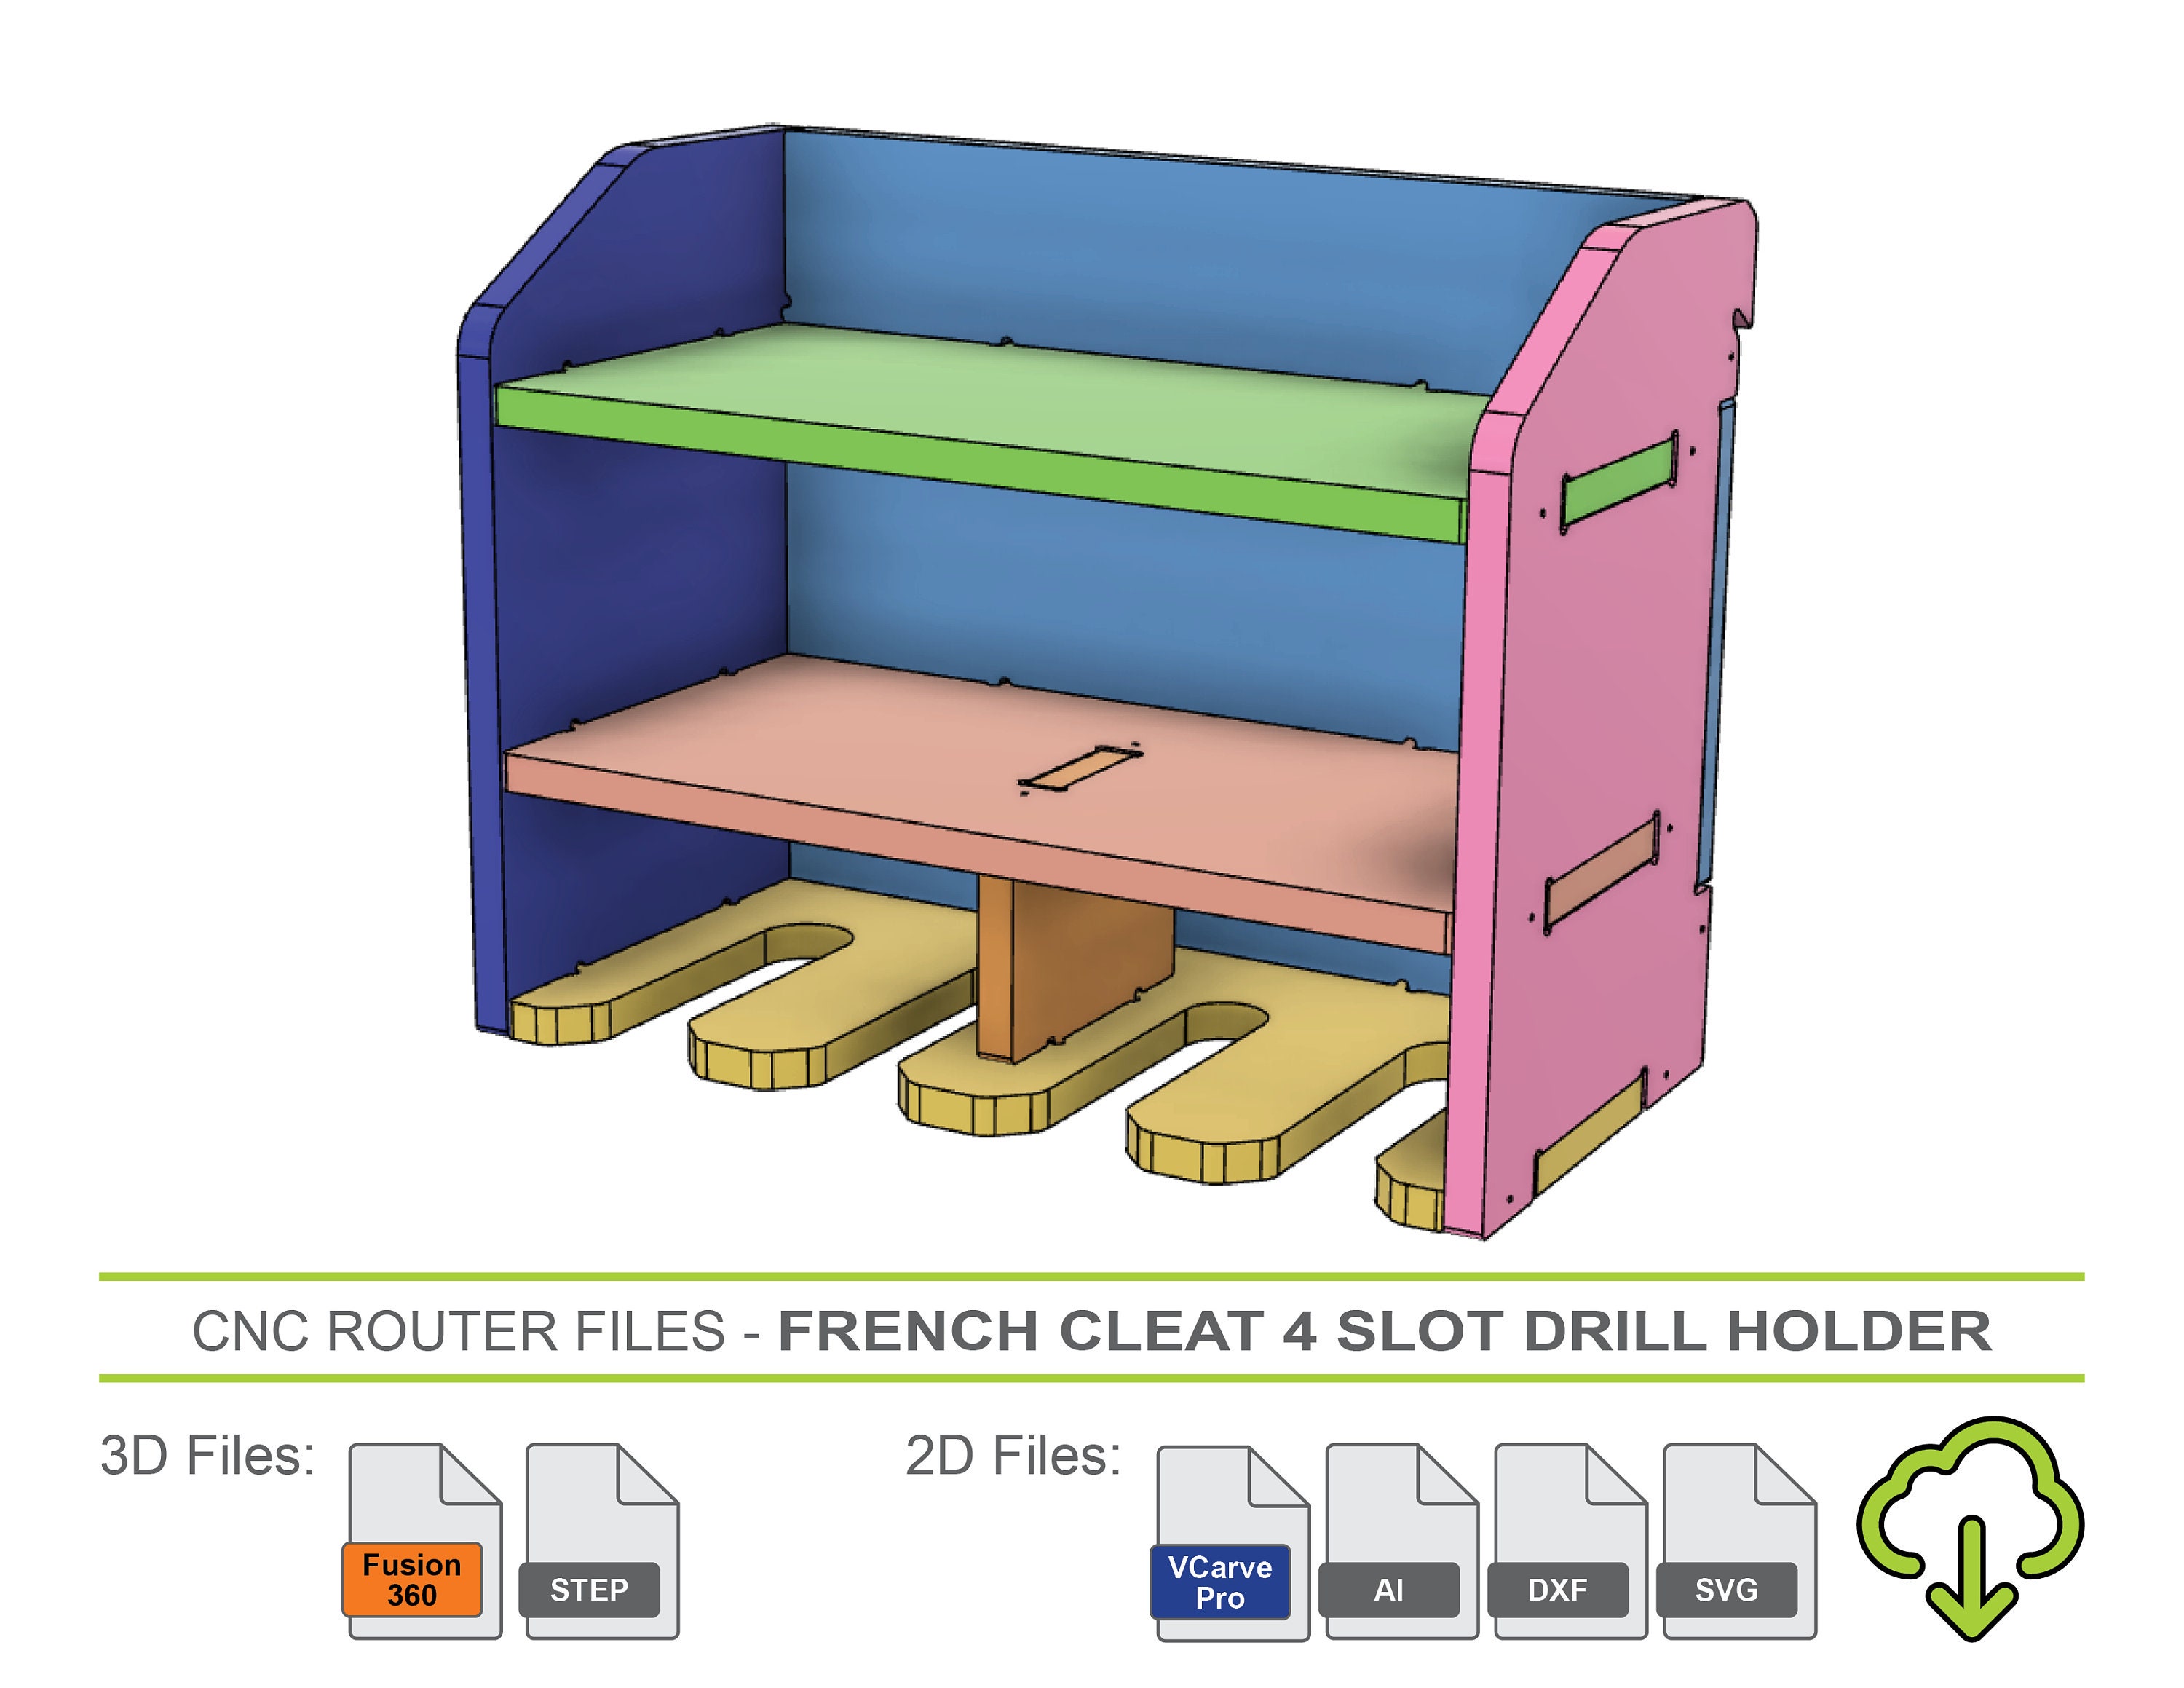 CNC Router Files French Cleat Plier Storage Rack – dryforge